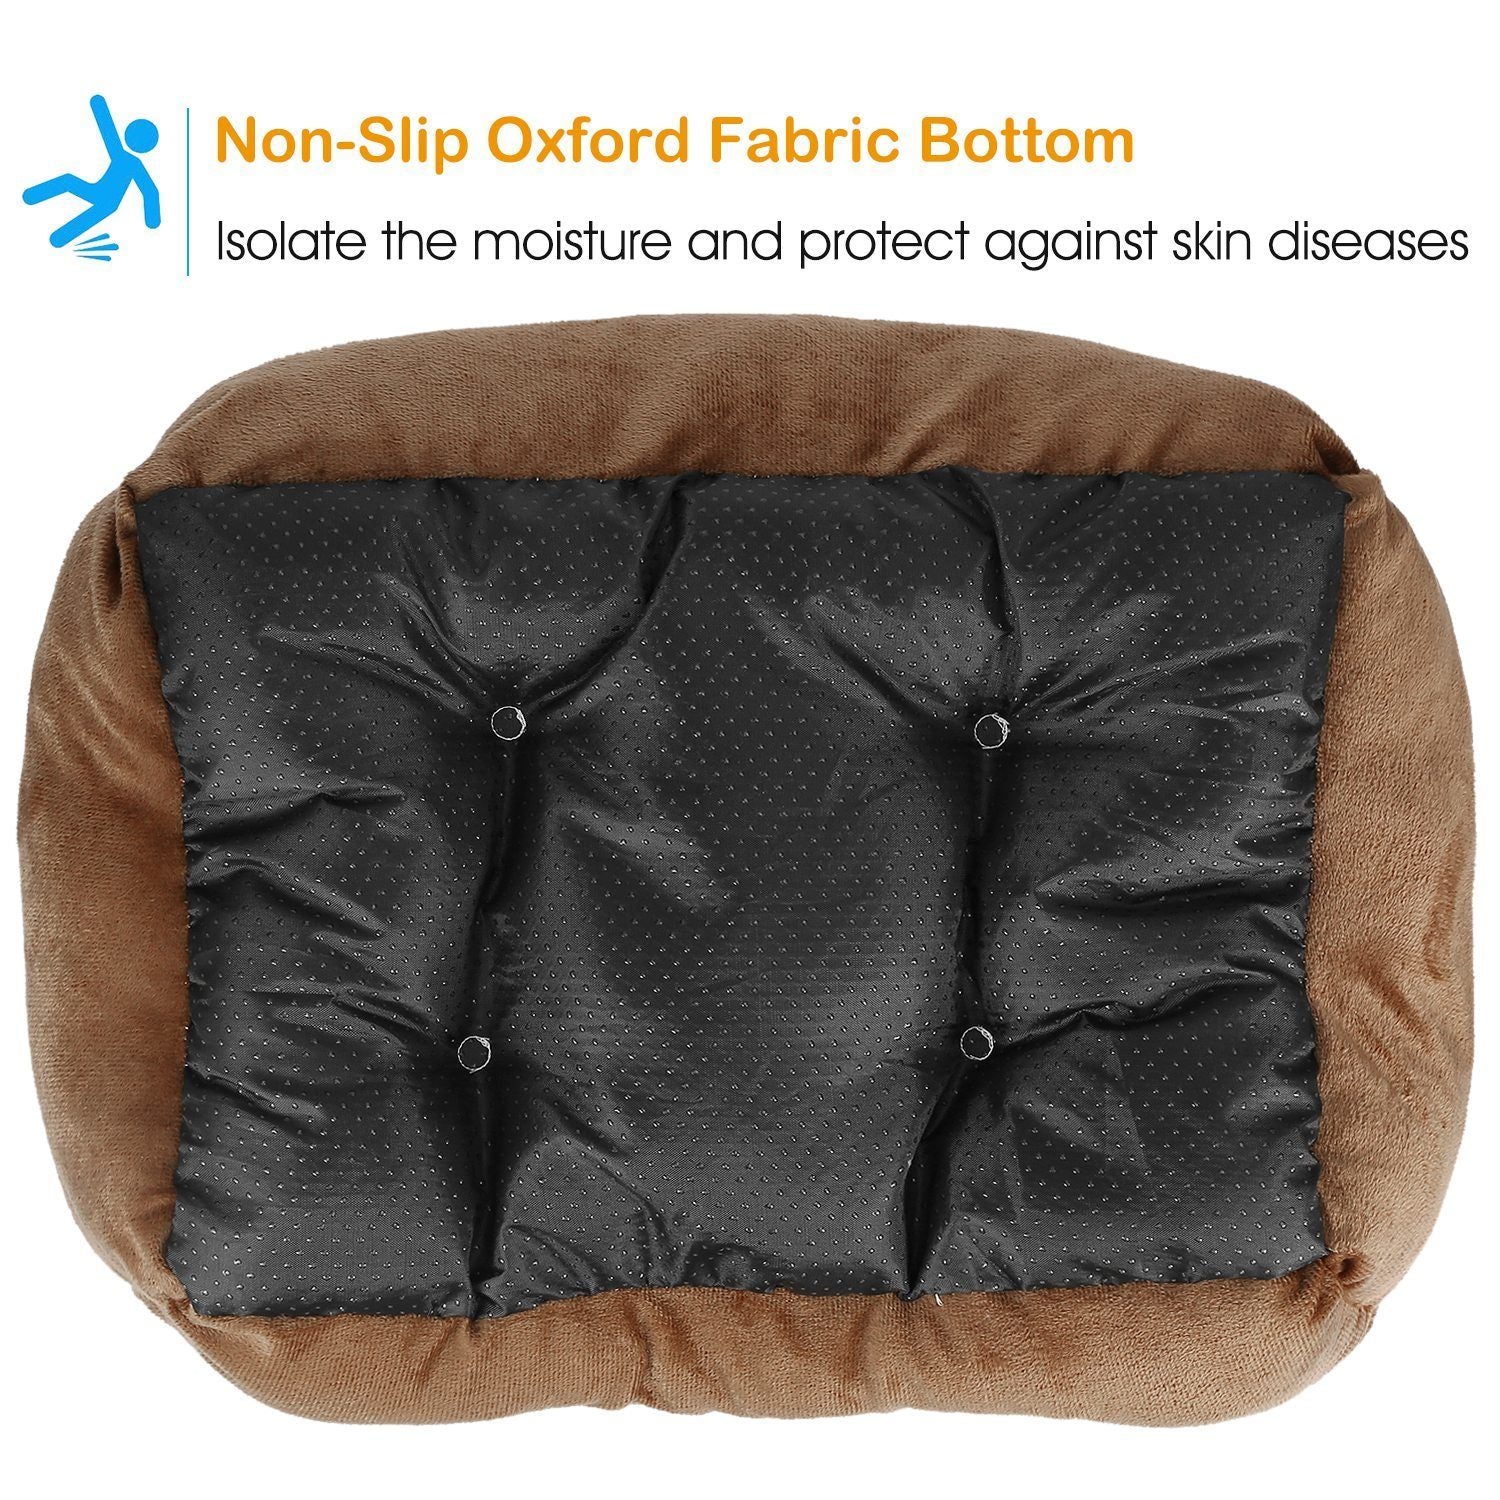 Pet Dog Bed Soft Warm Fleece Puppy Cat Bed Dog Cozy Nest Sofa Bed Cushion Mat S Size - WoodPoly.com